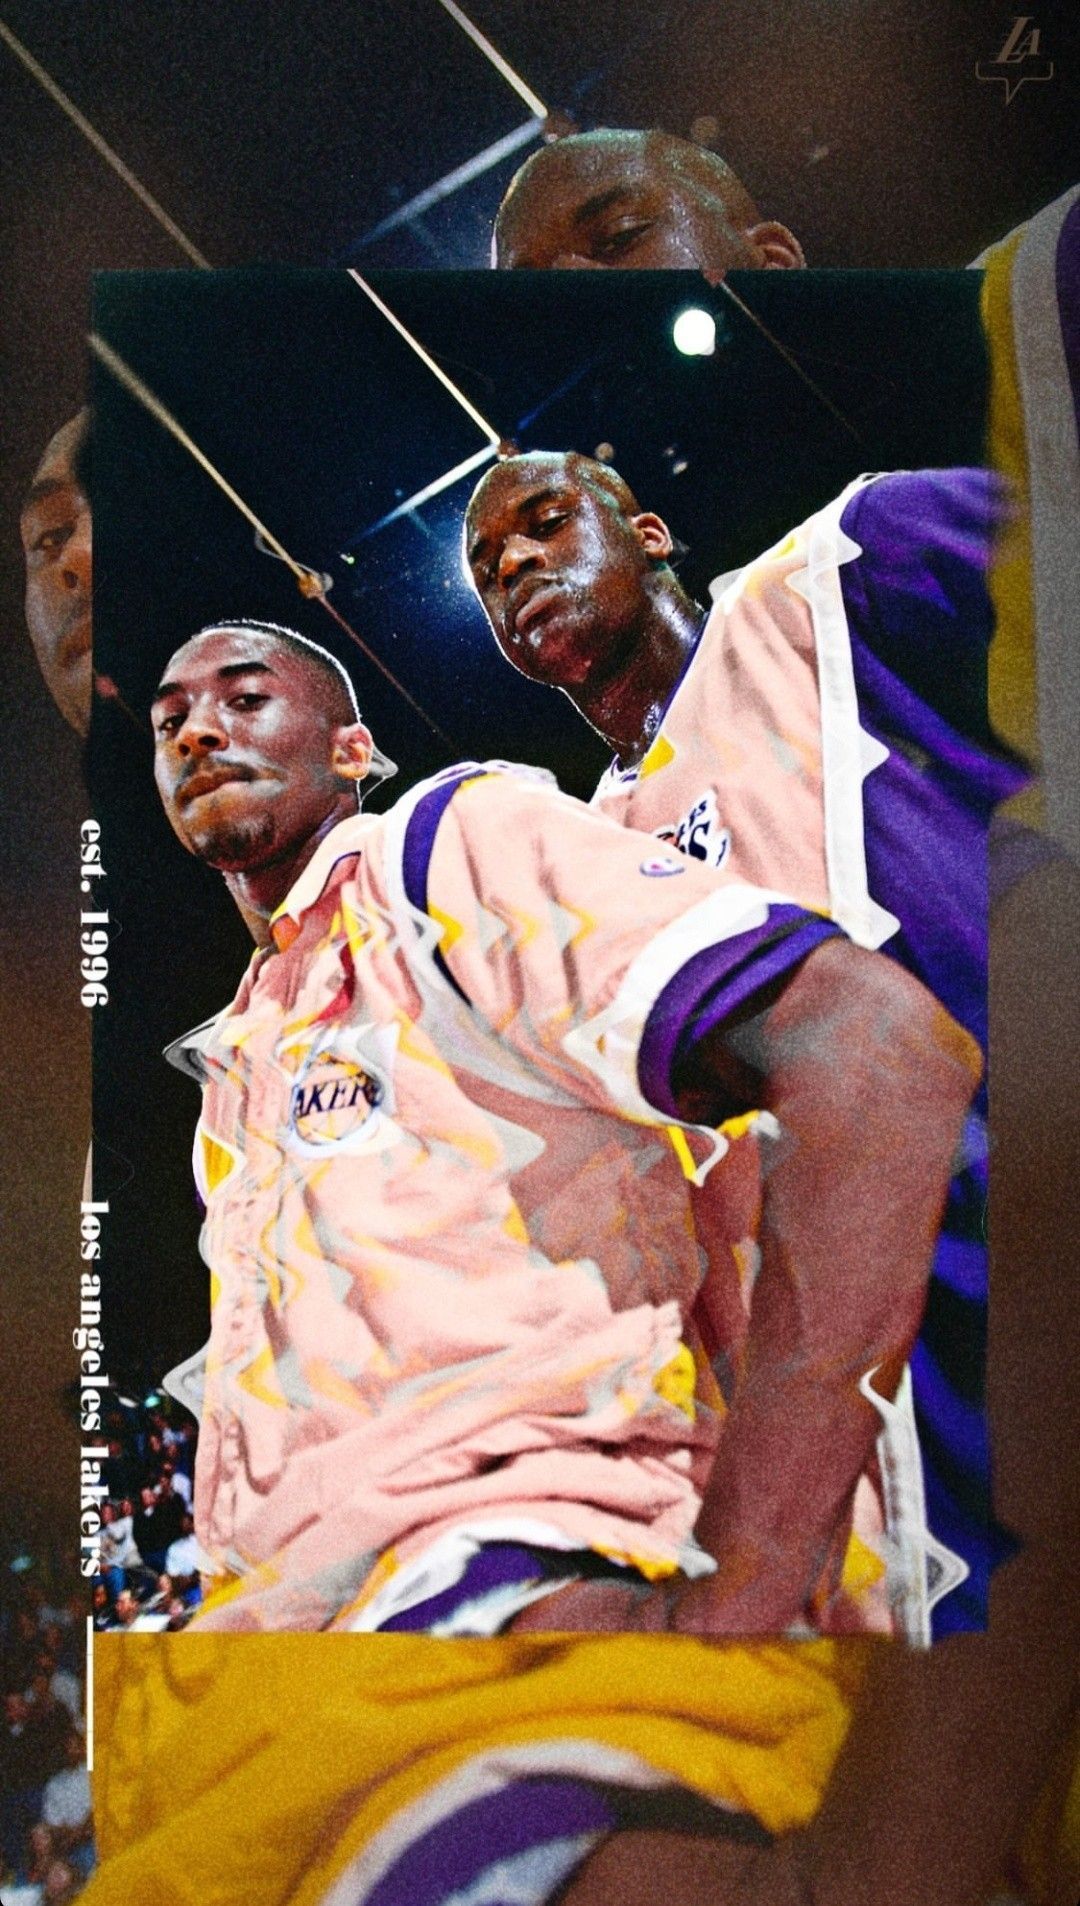 Kobe Bryant and Shaquille O'Neal wallpaper. Lakers wallpaper, Nba